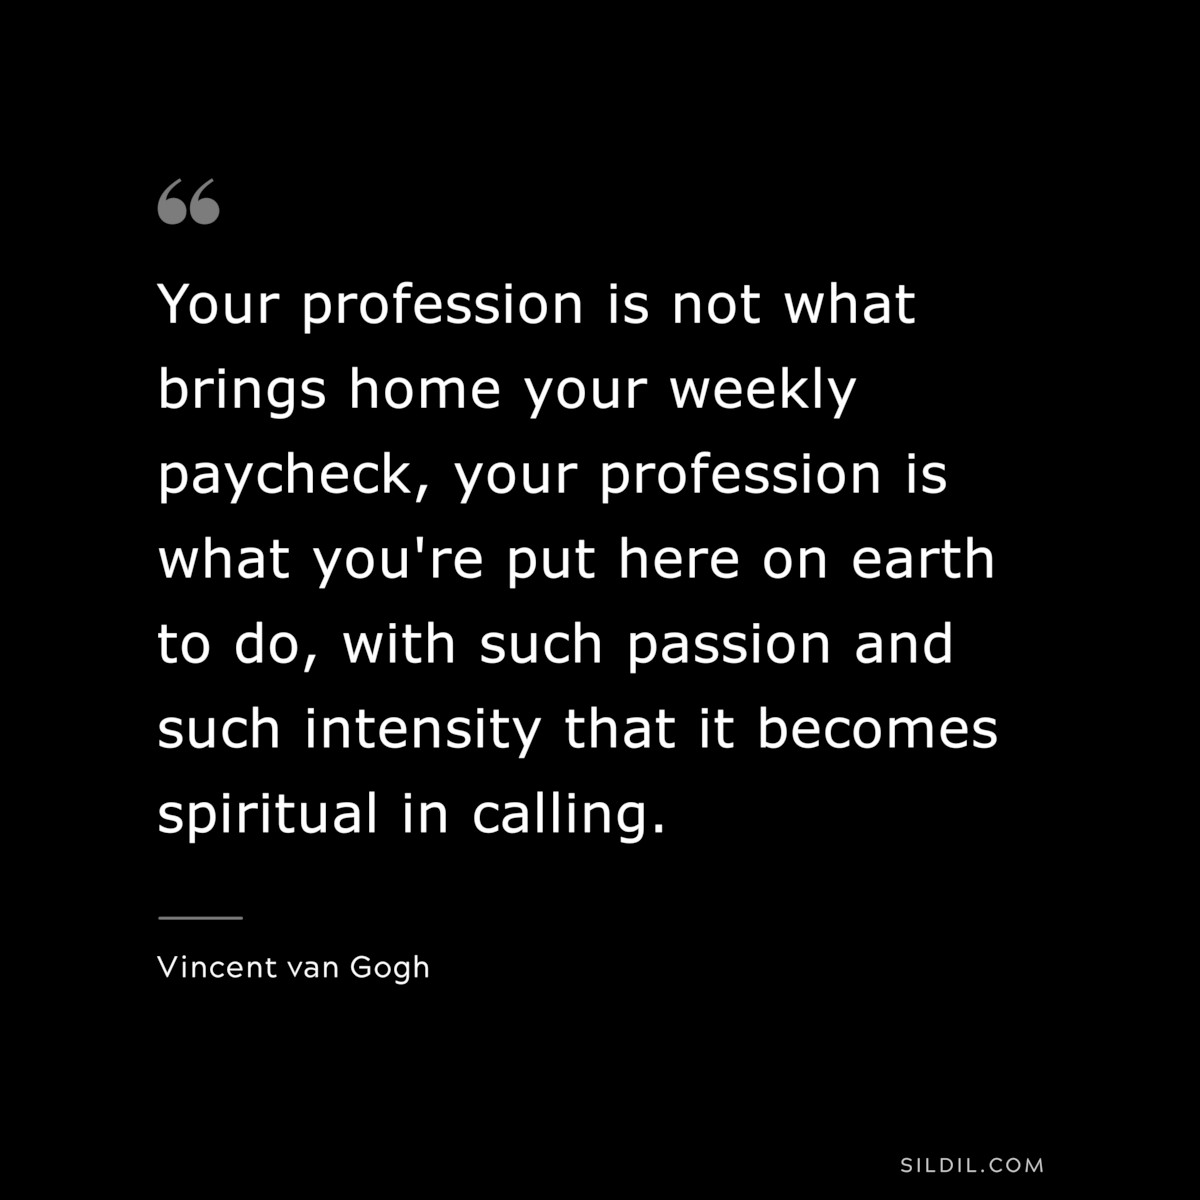 Your profession is not what brings home your weekly paycheck, your profession is what you're put here on earth to do, with such passion and such intensity that it becomes spiritual in calling. ― Vincent van Gogh